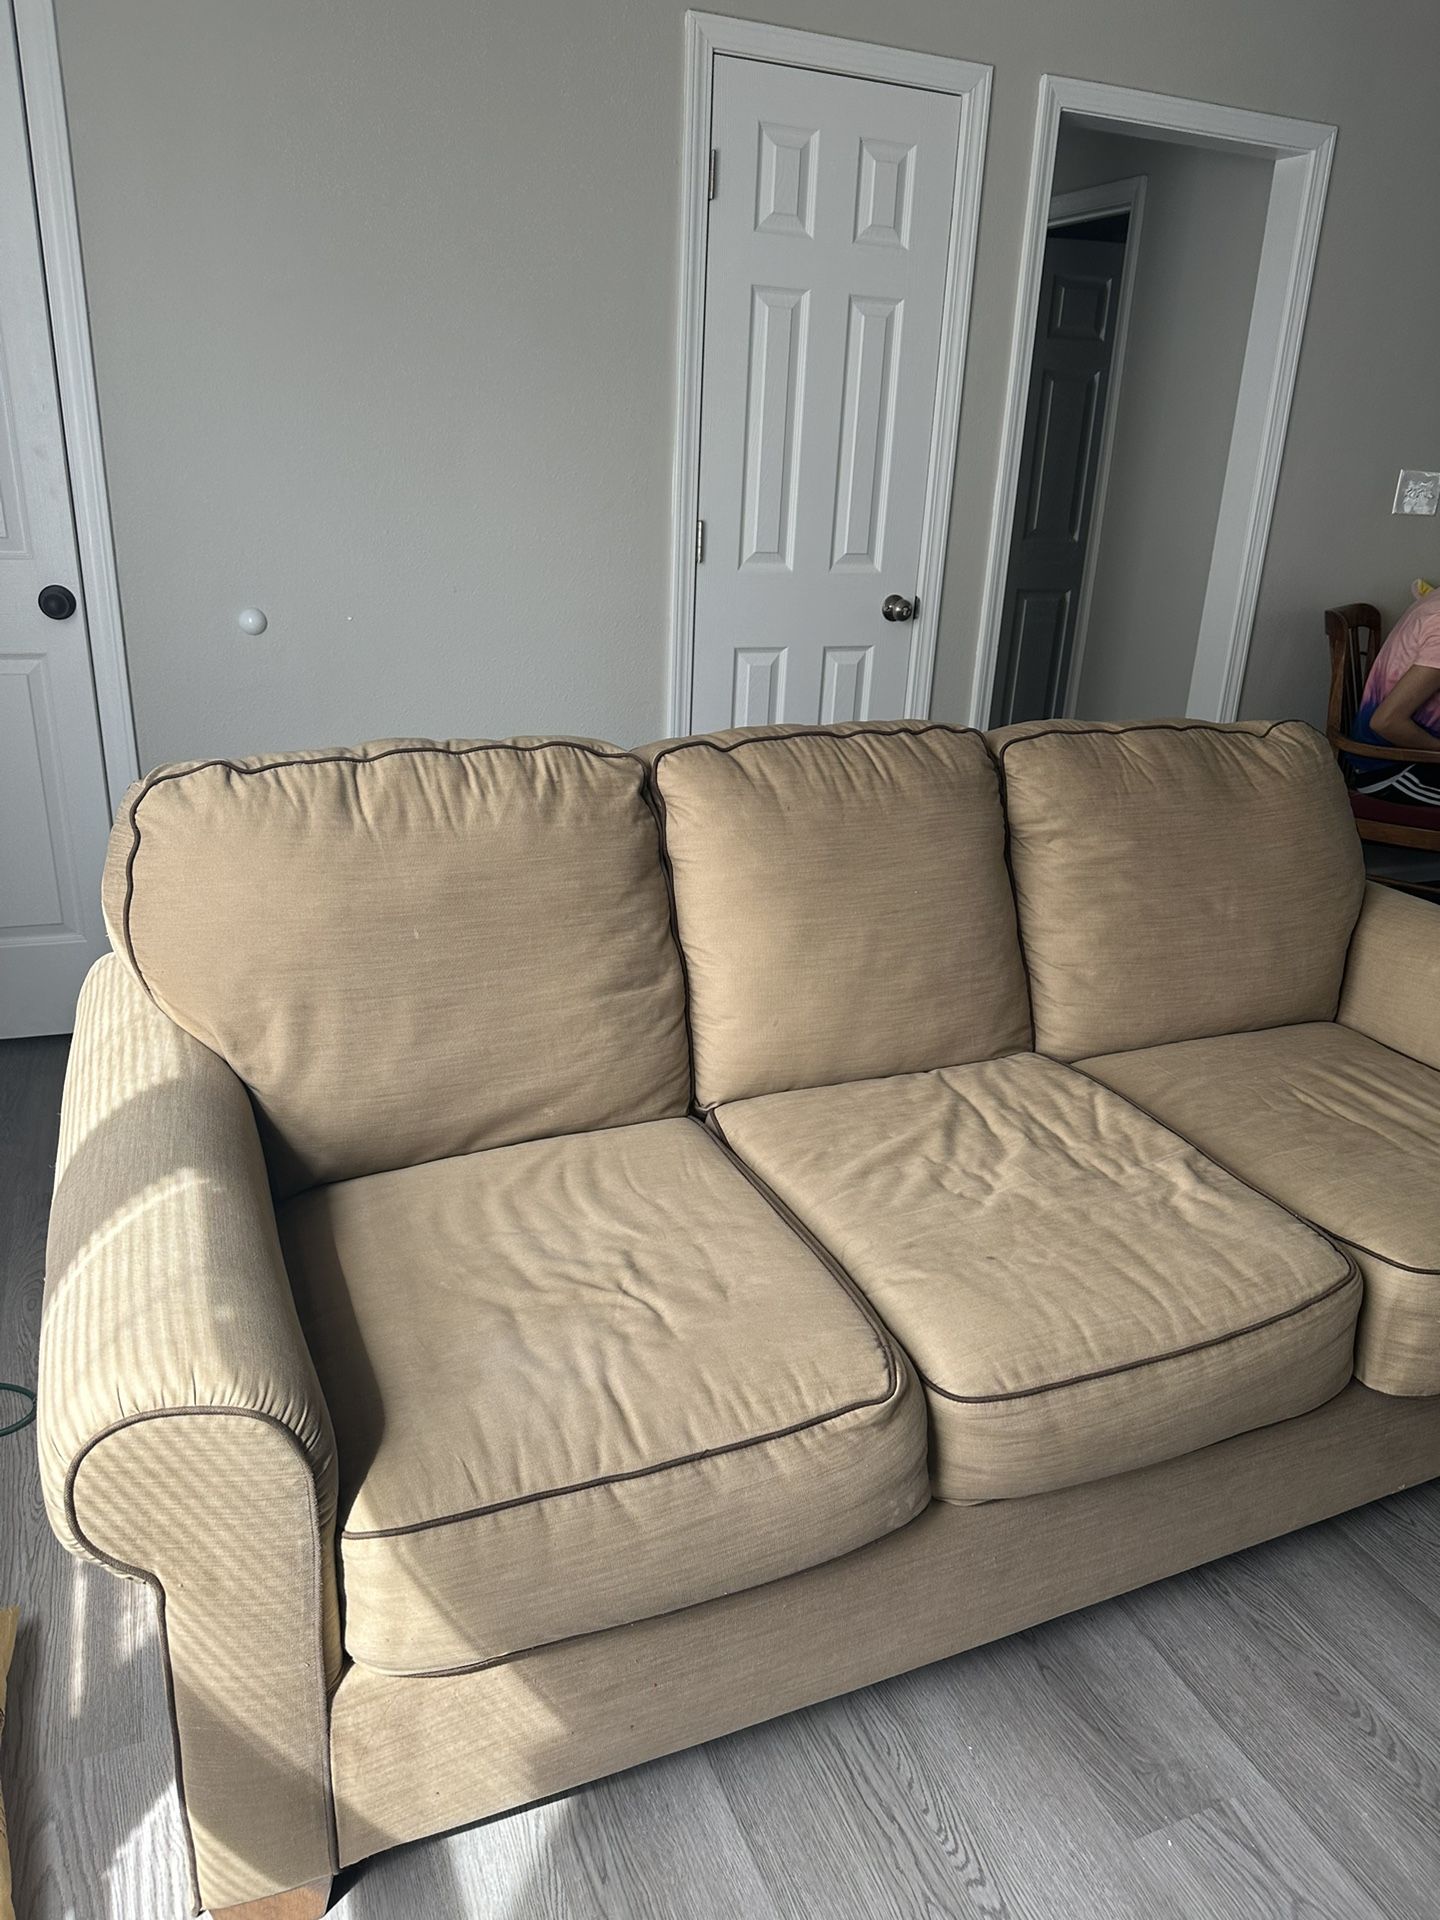 Moving out Sale - Needs To Be Gone Today